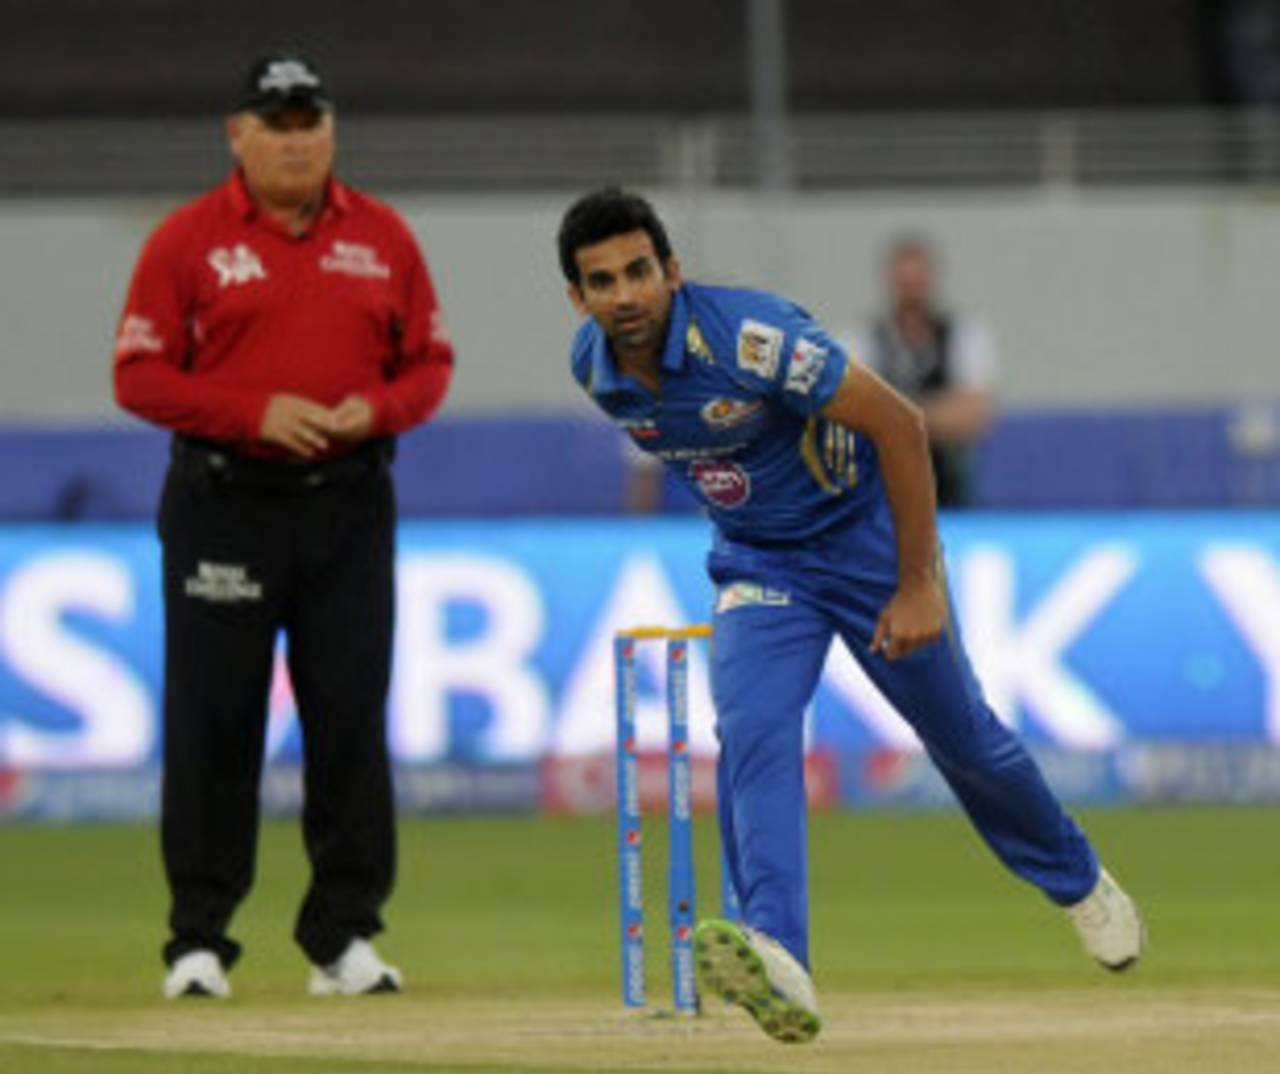 Zaheer Khan is understood to be a far way yet from returning to competitive cricket&nbsp;&nbsp;&bull;&nbsp;&nbsp;BCCI